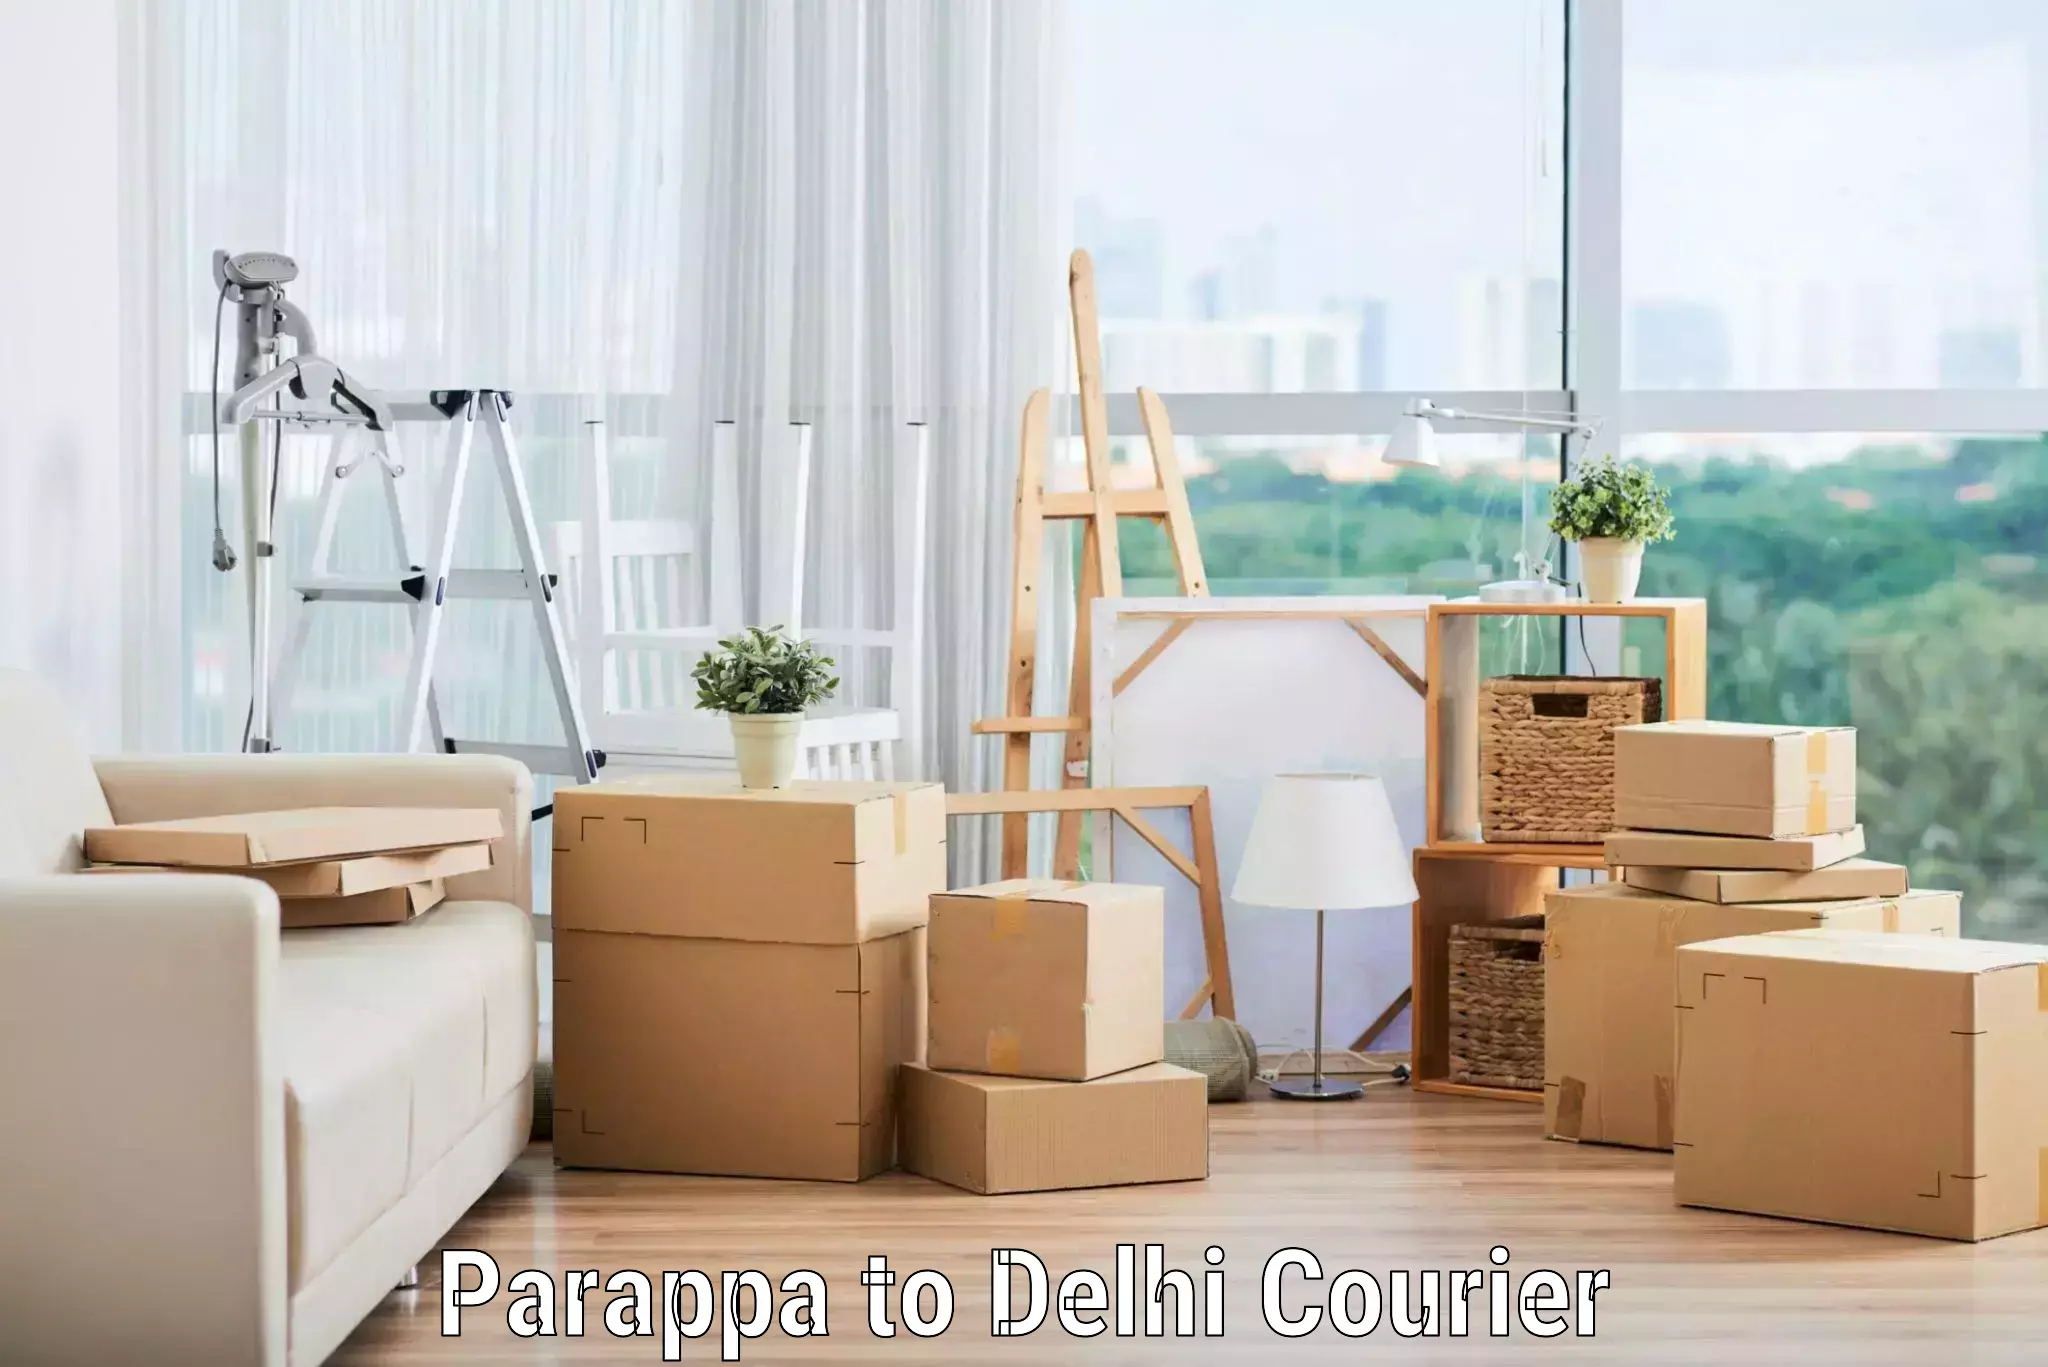 Expert furniture movers Parappa to Delhi Technological University DTU